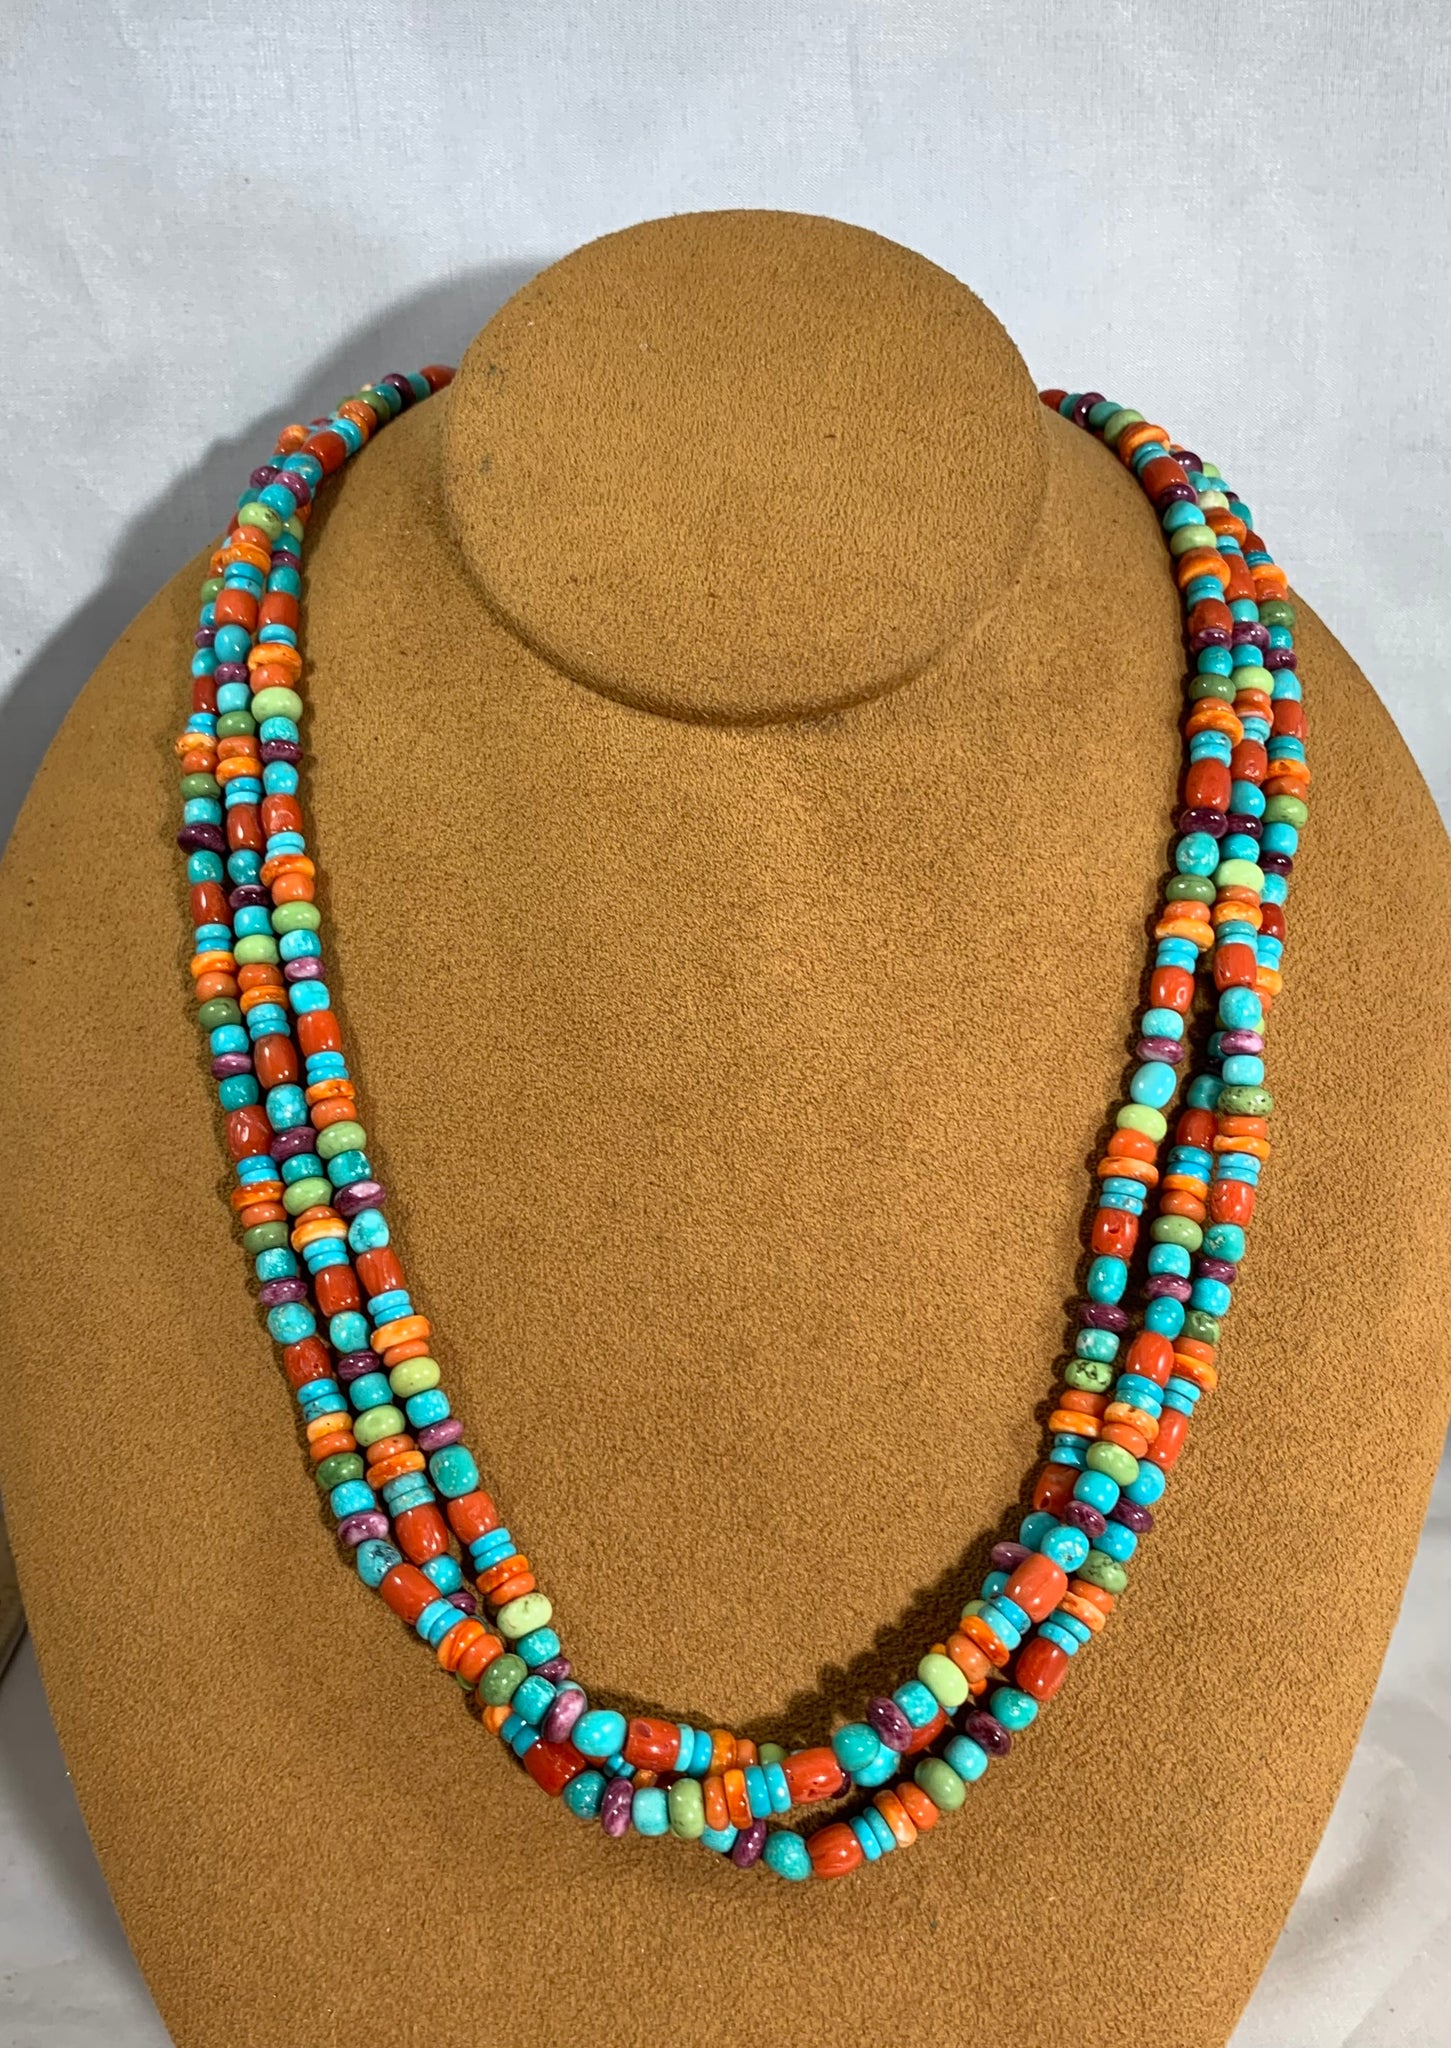 Three Strand Turquoise and Multi-Stone Necklace by Don Lucas